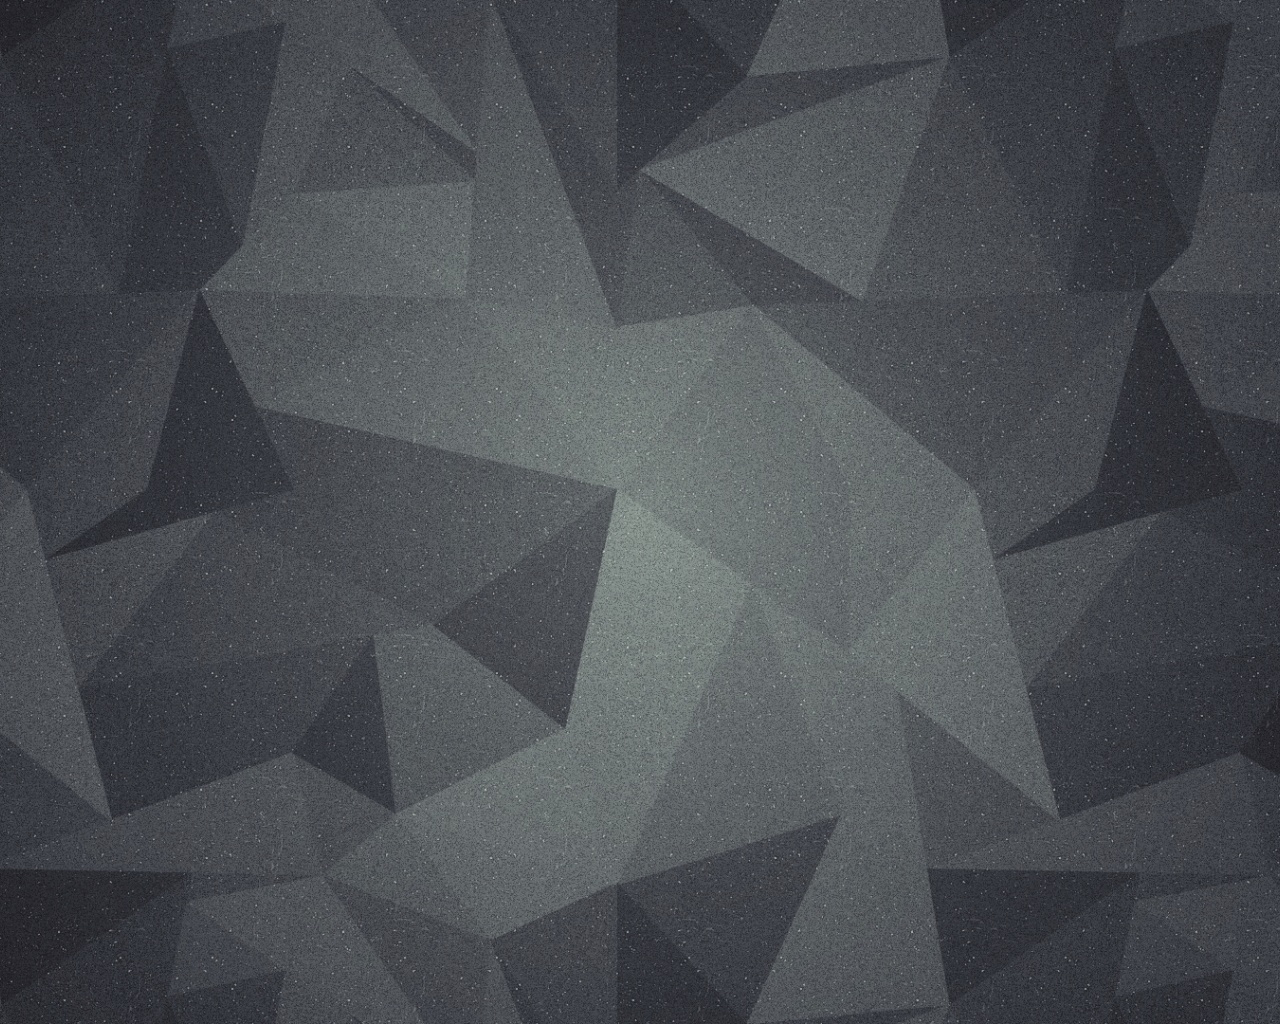 Abstract Geometry Wallpapers